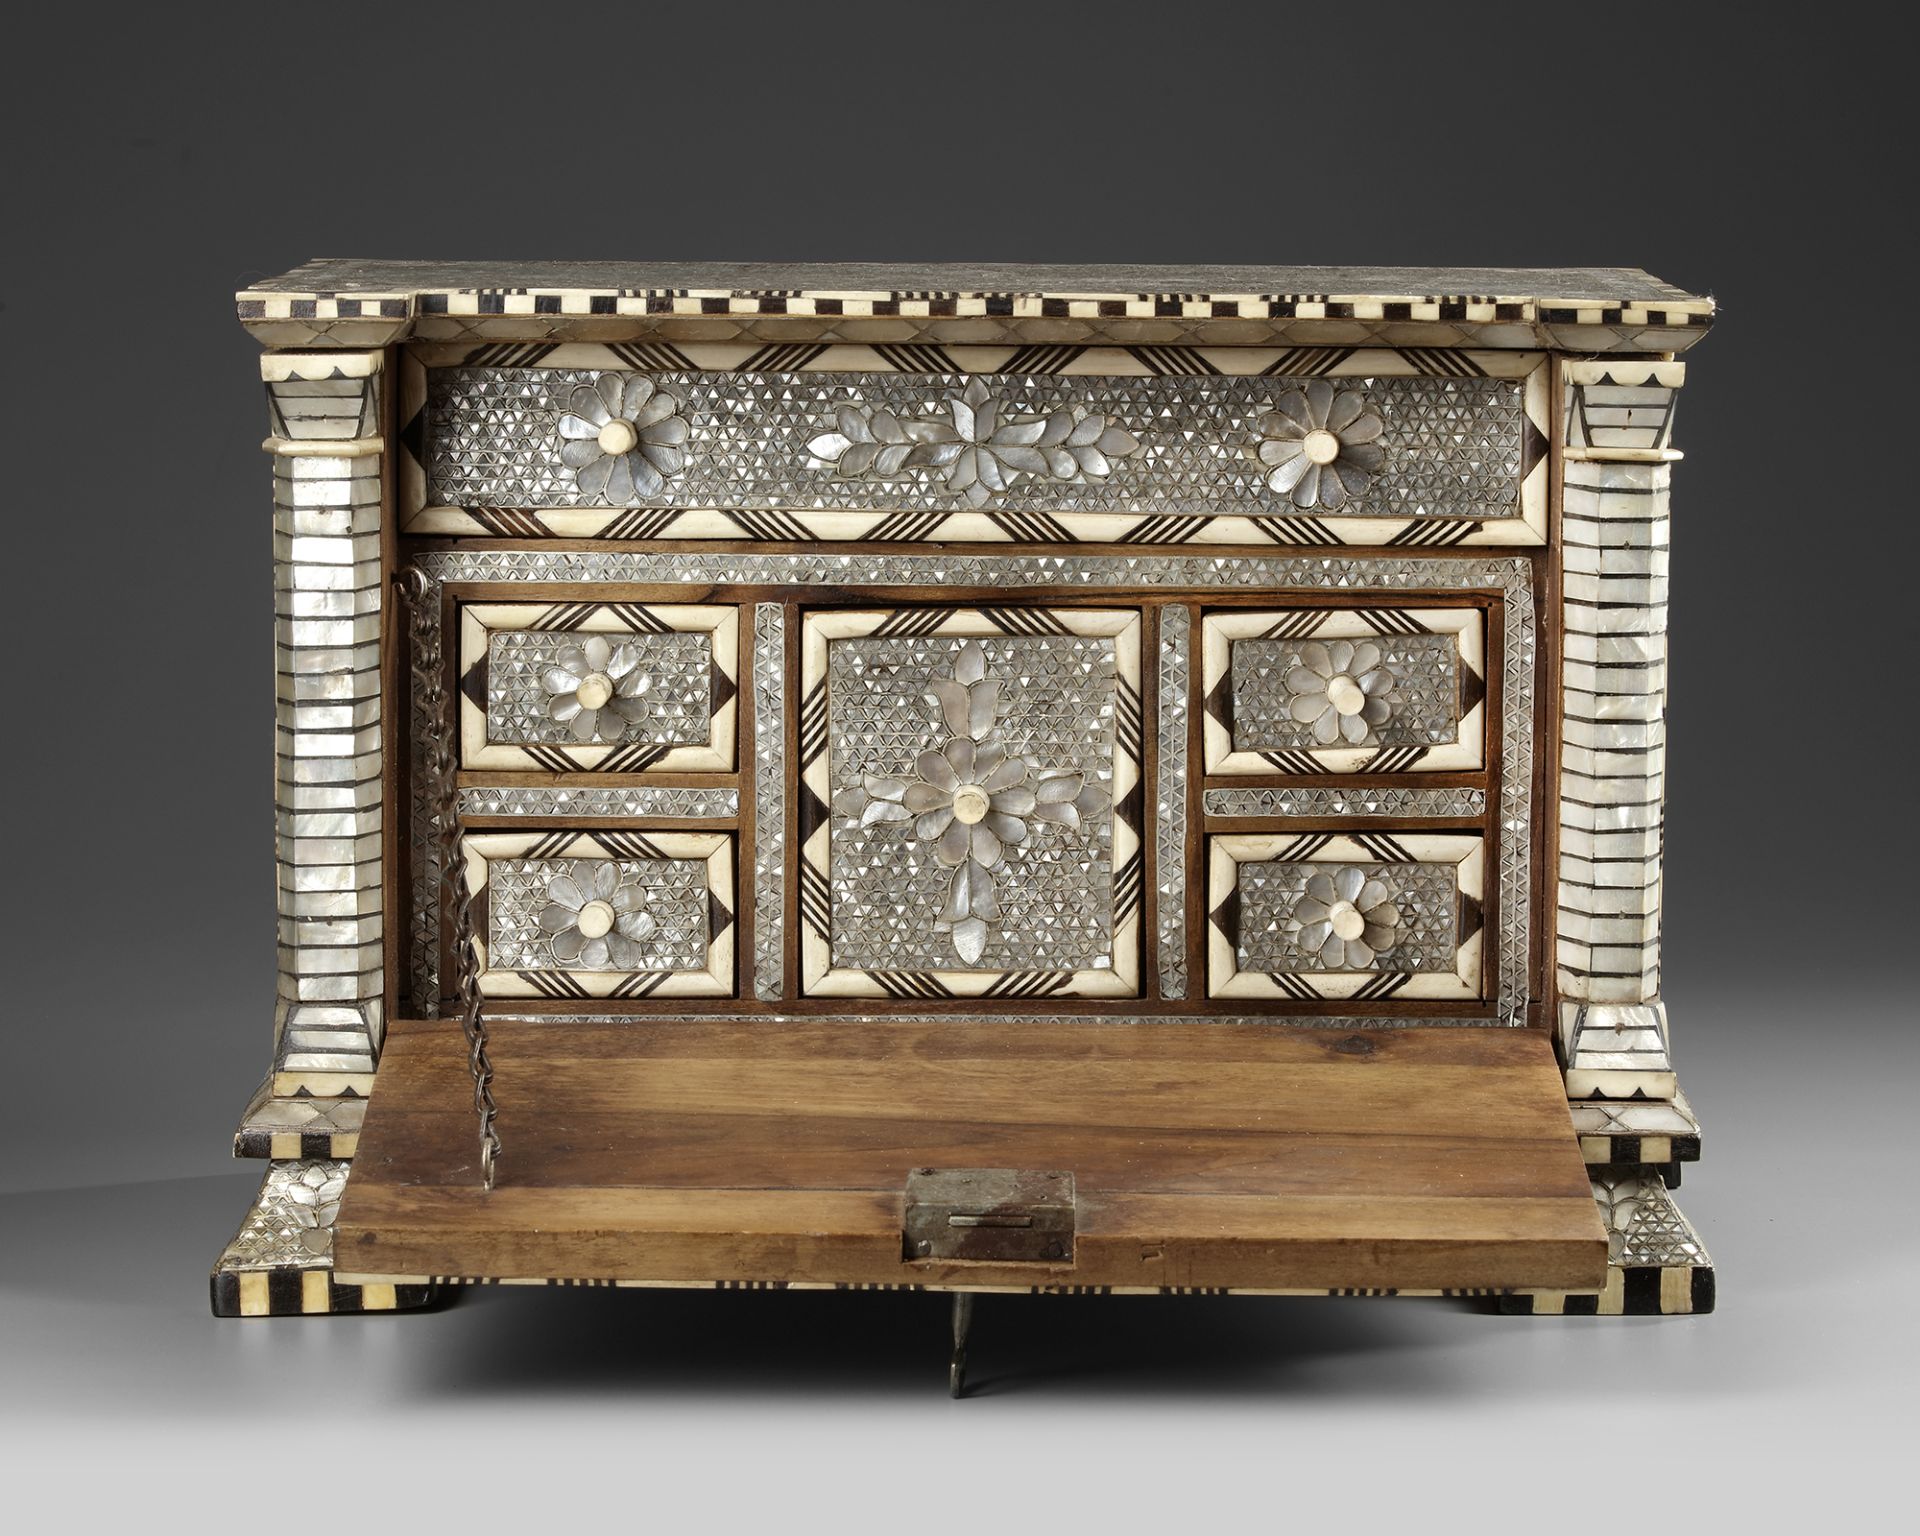 AN OTTOMAN MOTHER-OF-PEARL AND BONE INLAID CHEST, TURKEY, EARLY 20TH CENTURY - Image 4 of 5